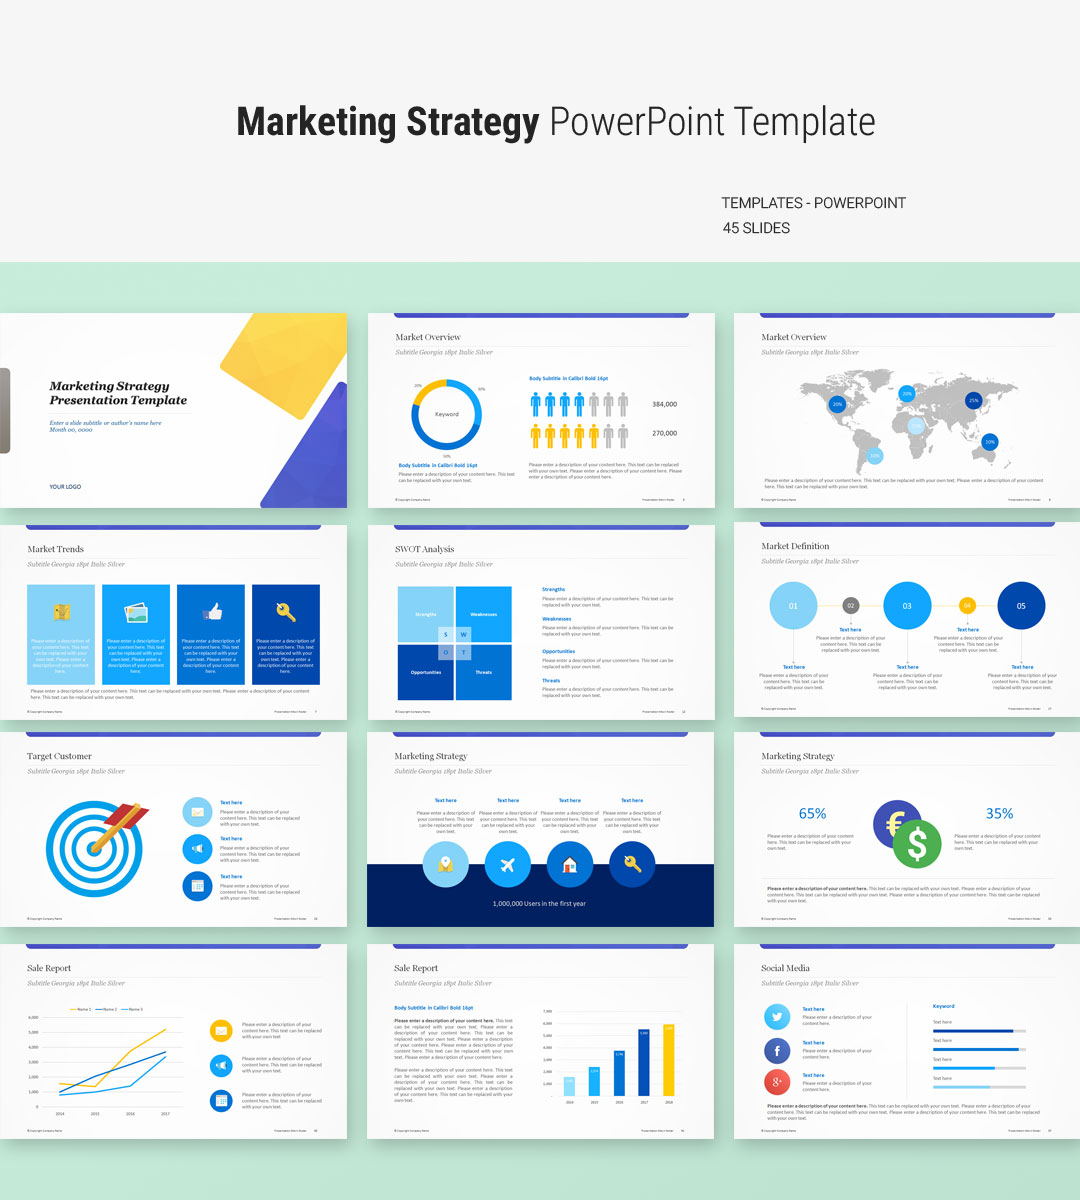 Marketing Strategy Template Ppt